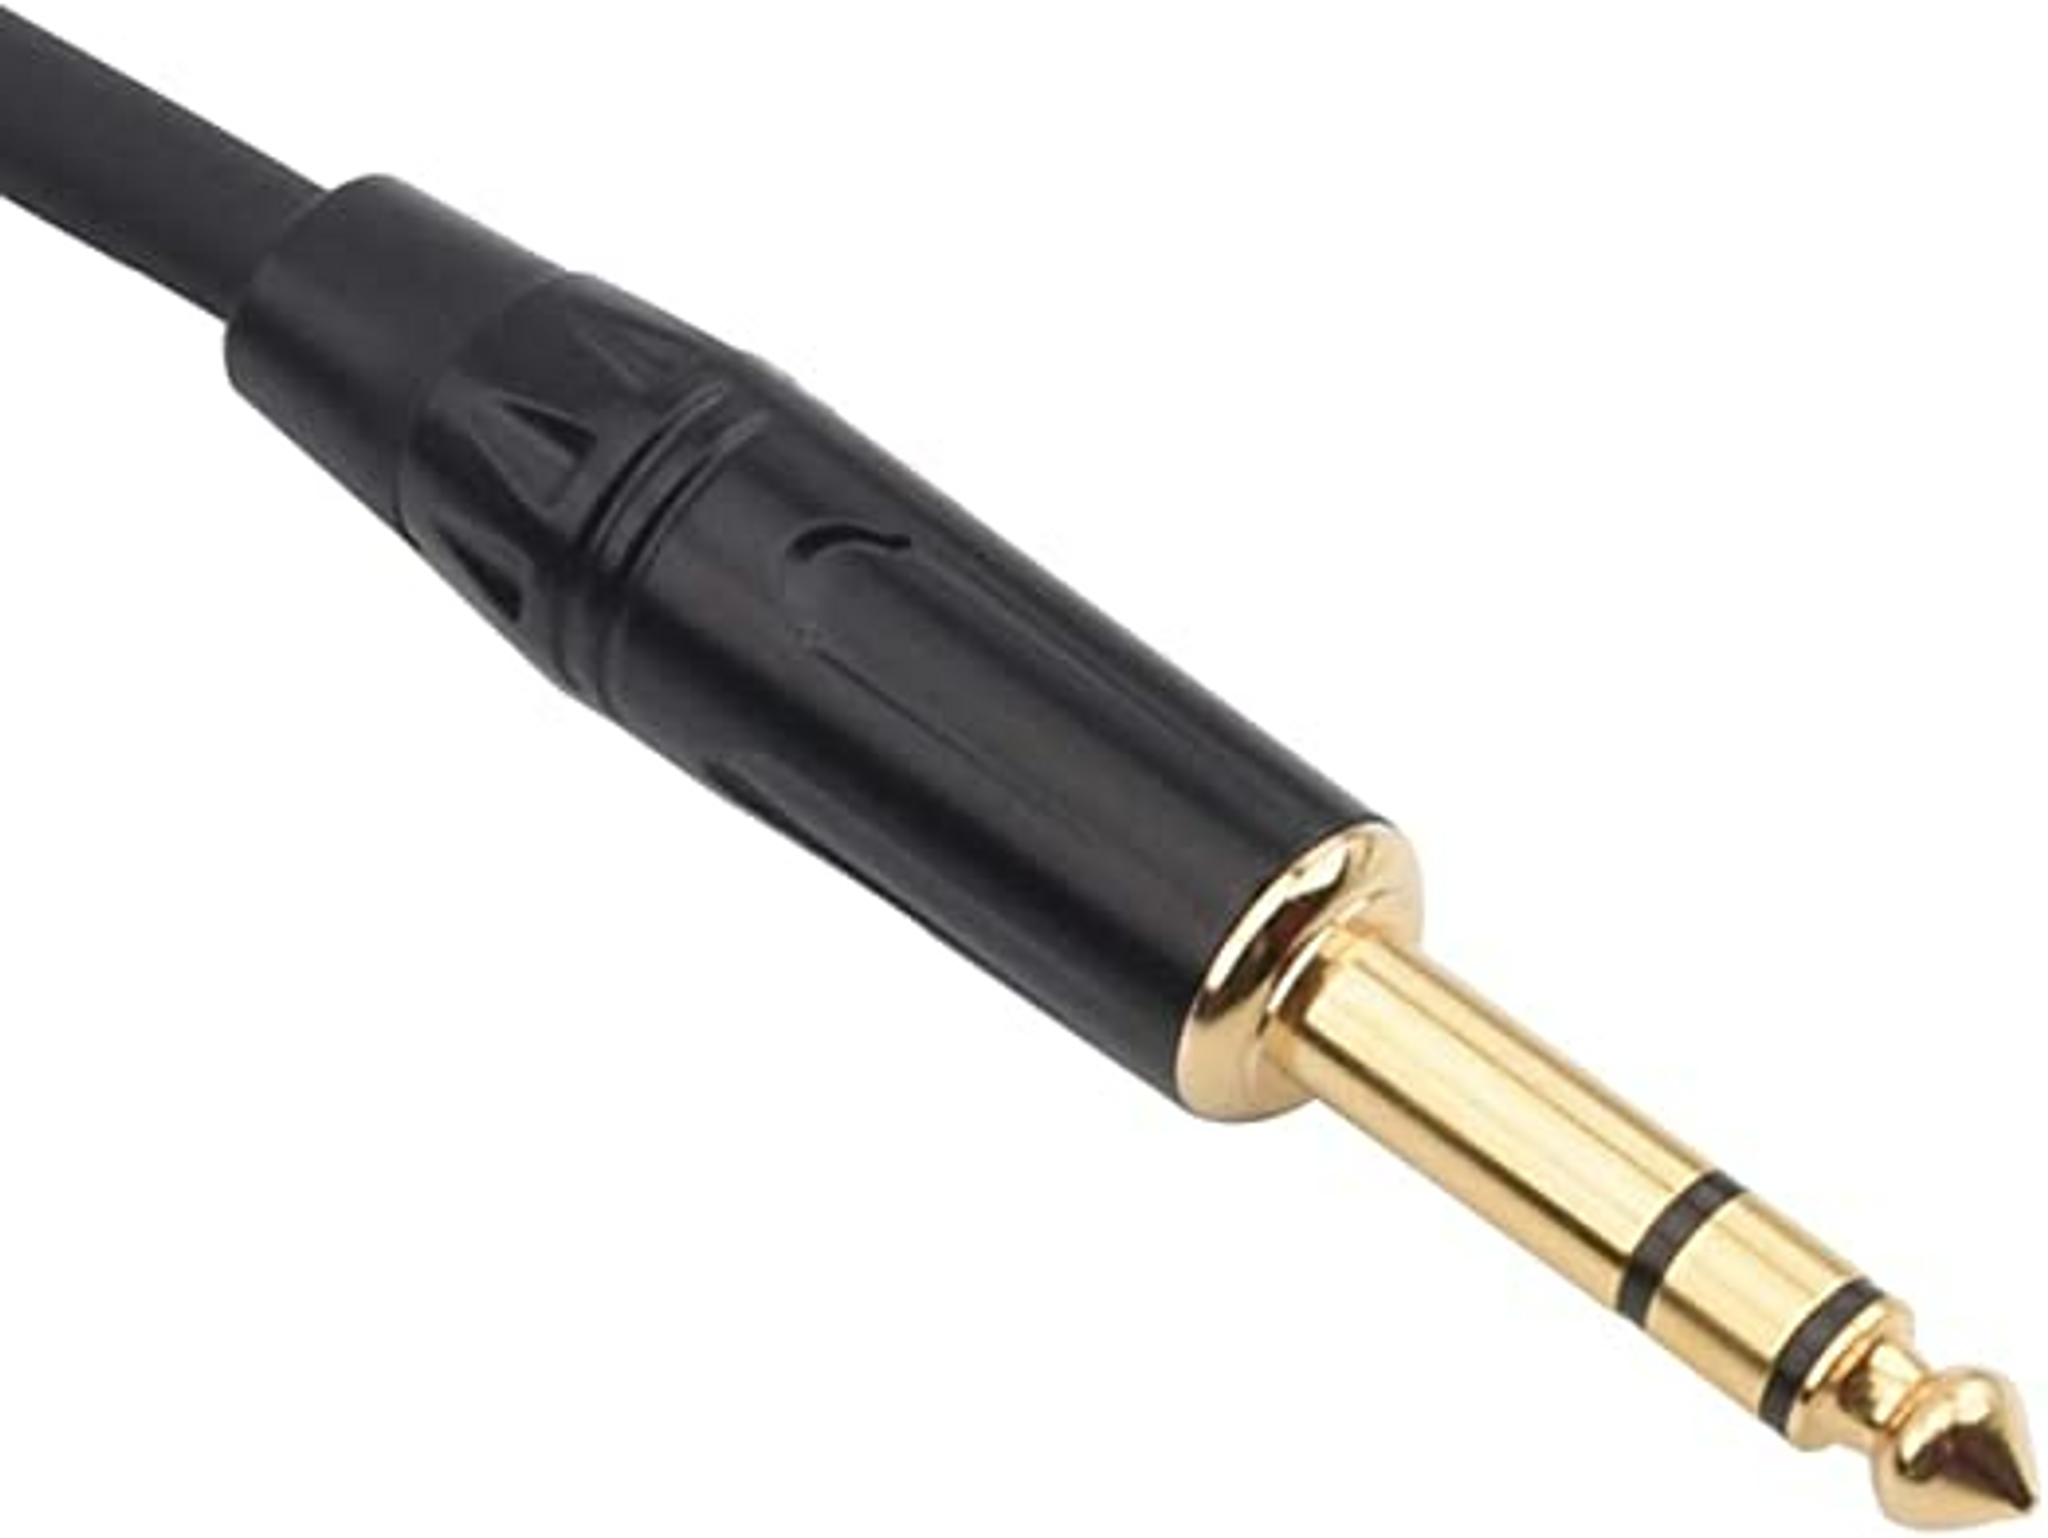 TRS 1/4 Inch to XLR Cable XLR 3-Pin Female to Quarter Inch Male